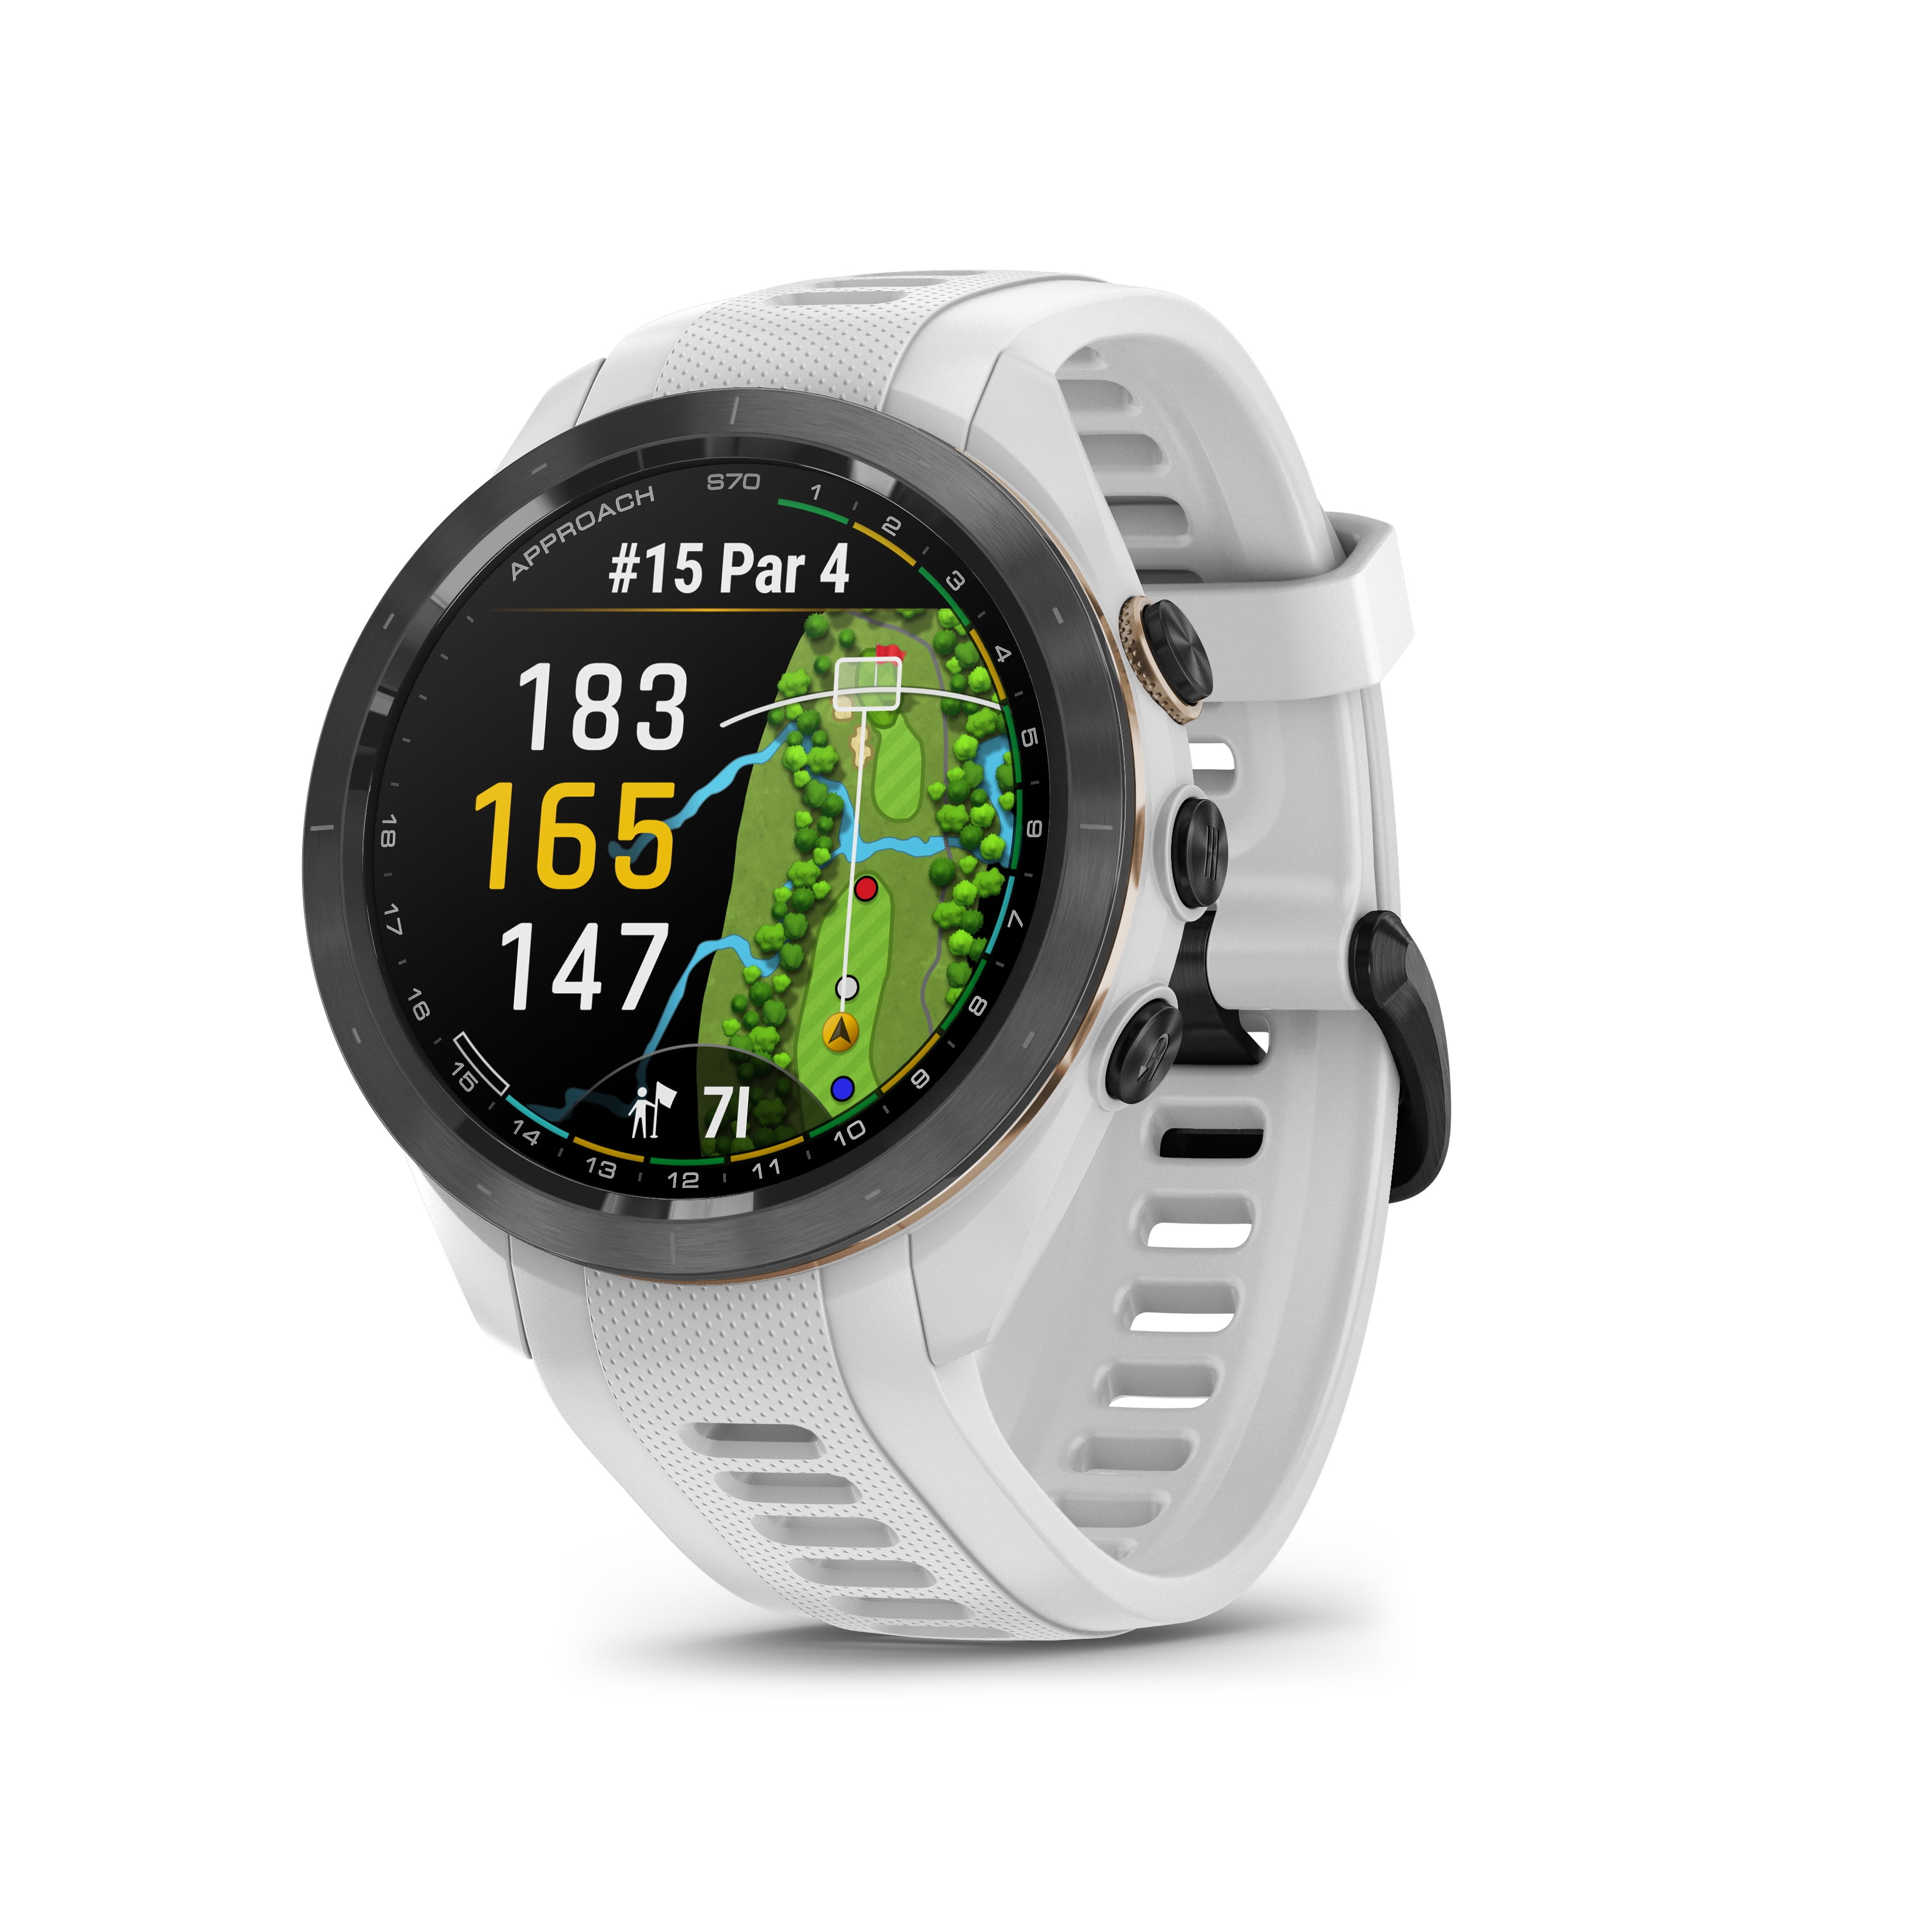 Garmin Approach S70, White (42mm) Premium Golf GPS Watch, 43,000+  Full-color CourseView Maps with Wearable4U Power Bank Bundle